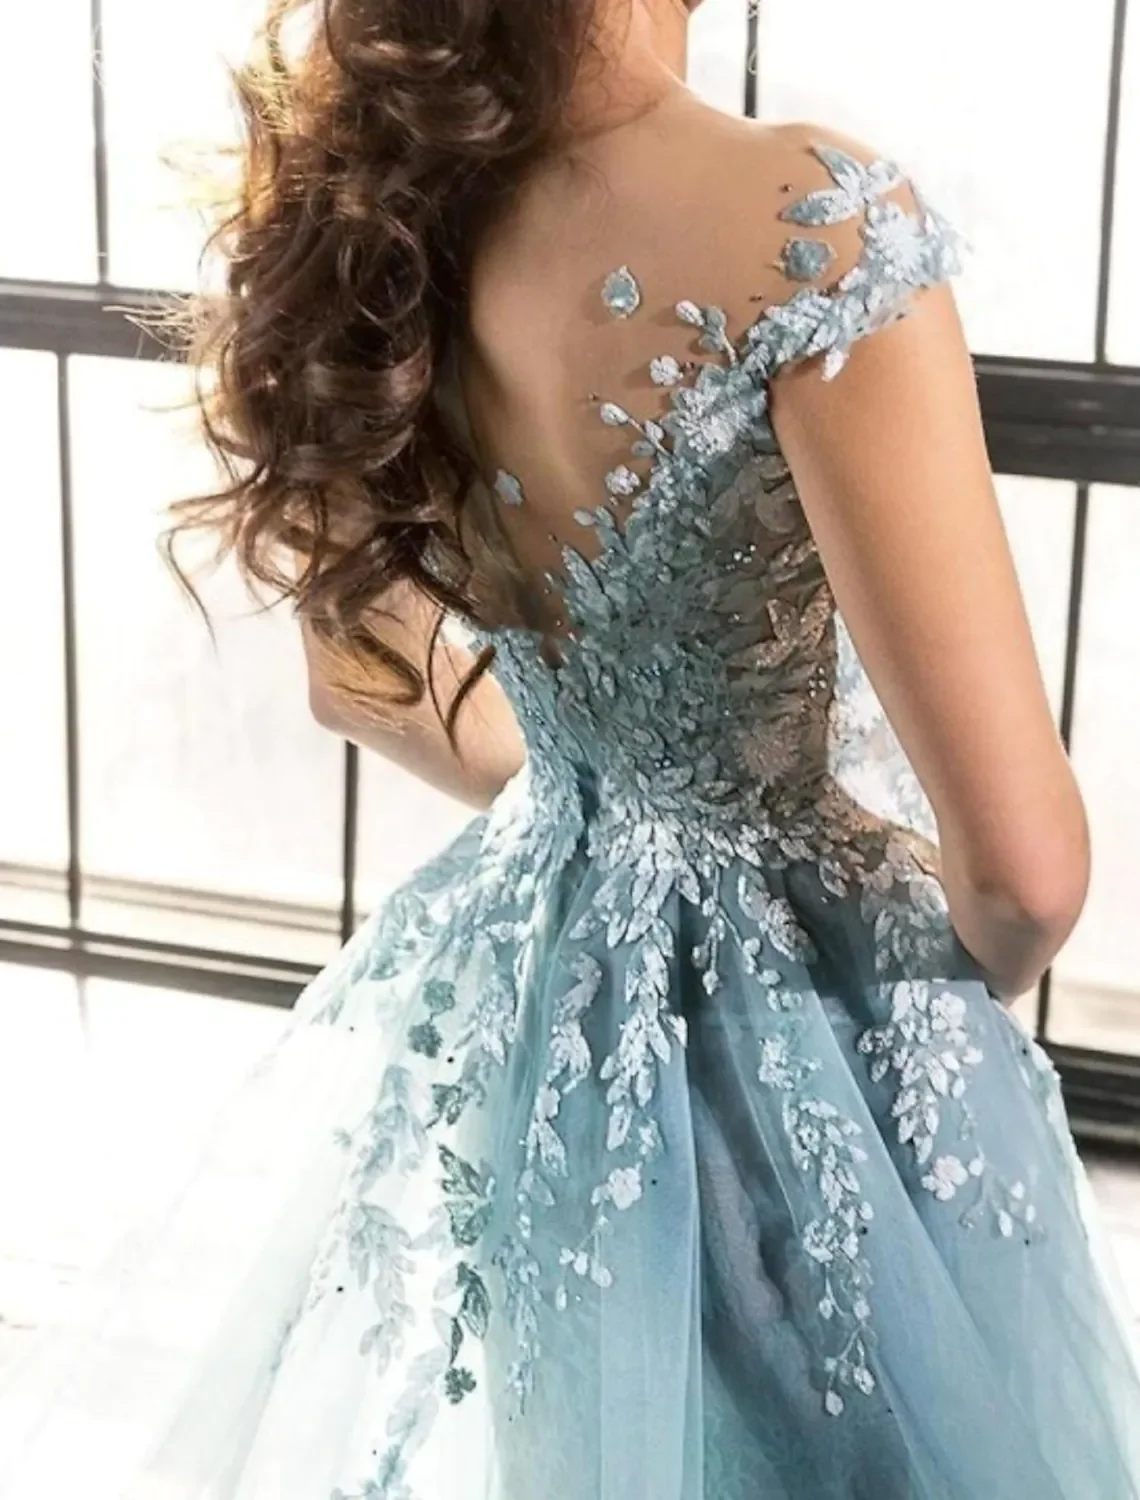 Vkiss 2022 Light Blue Sweetheart Neck Evening Dress Strapless Backless Tiered High Low Formal Prom Party Gowns Vestido فساتين ال